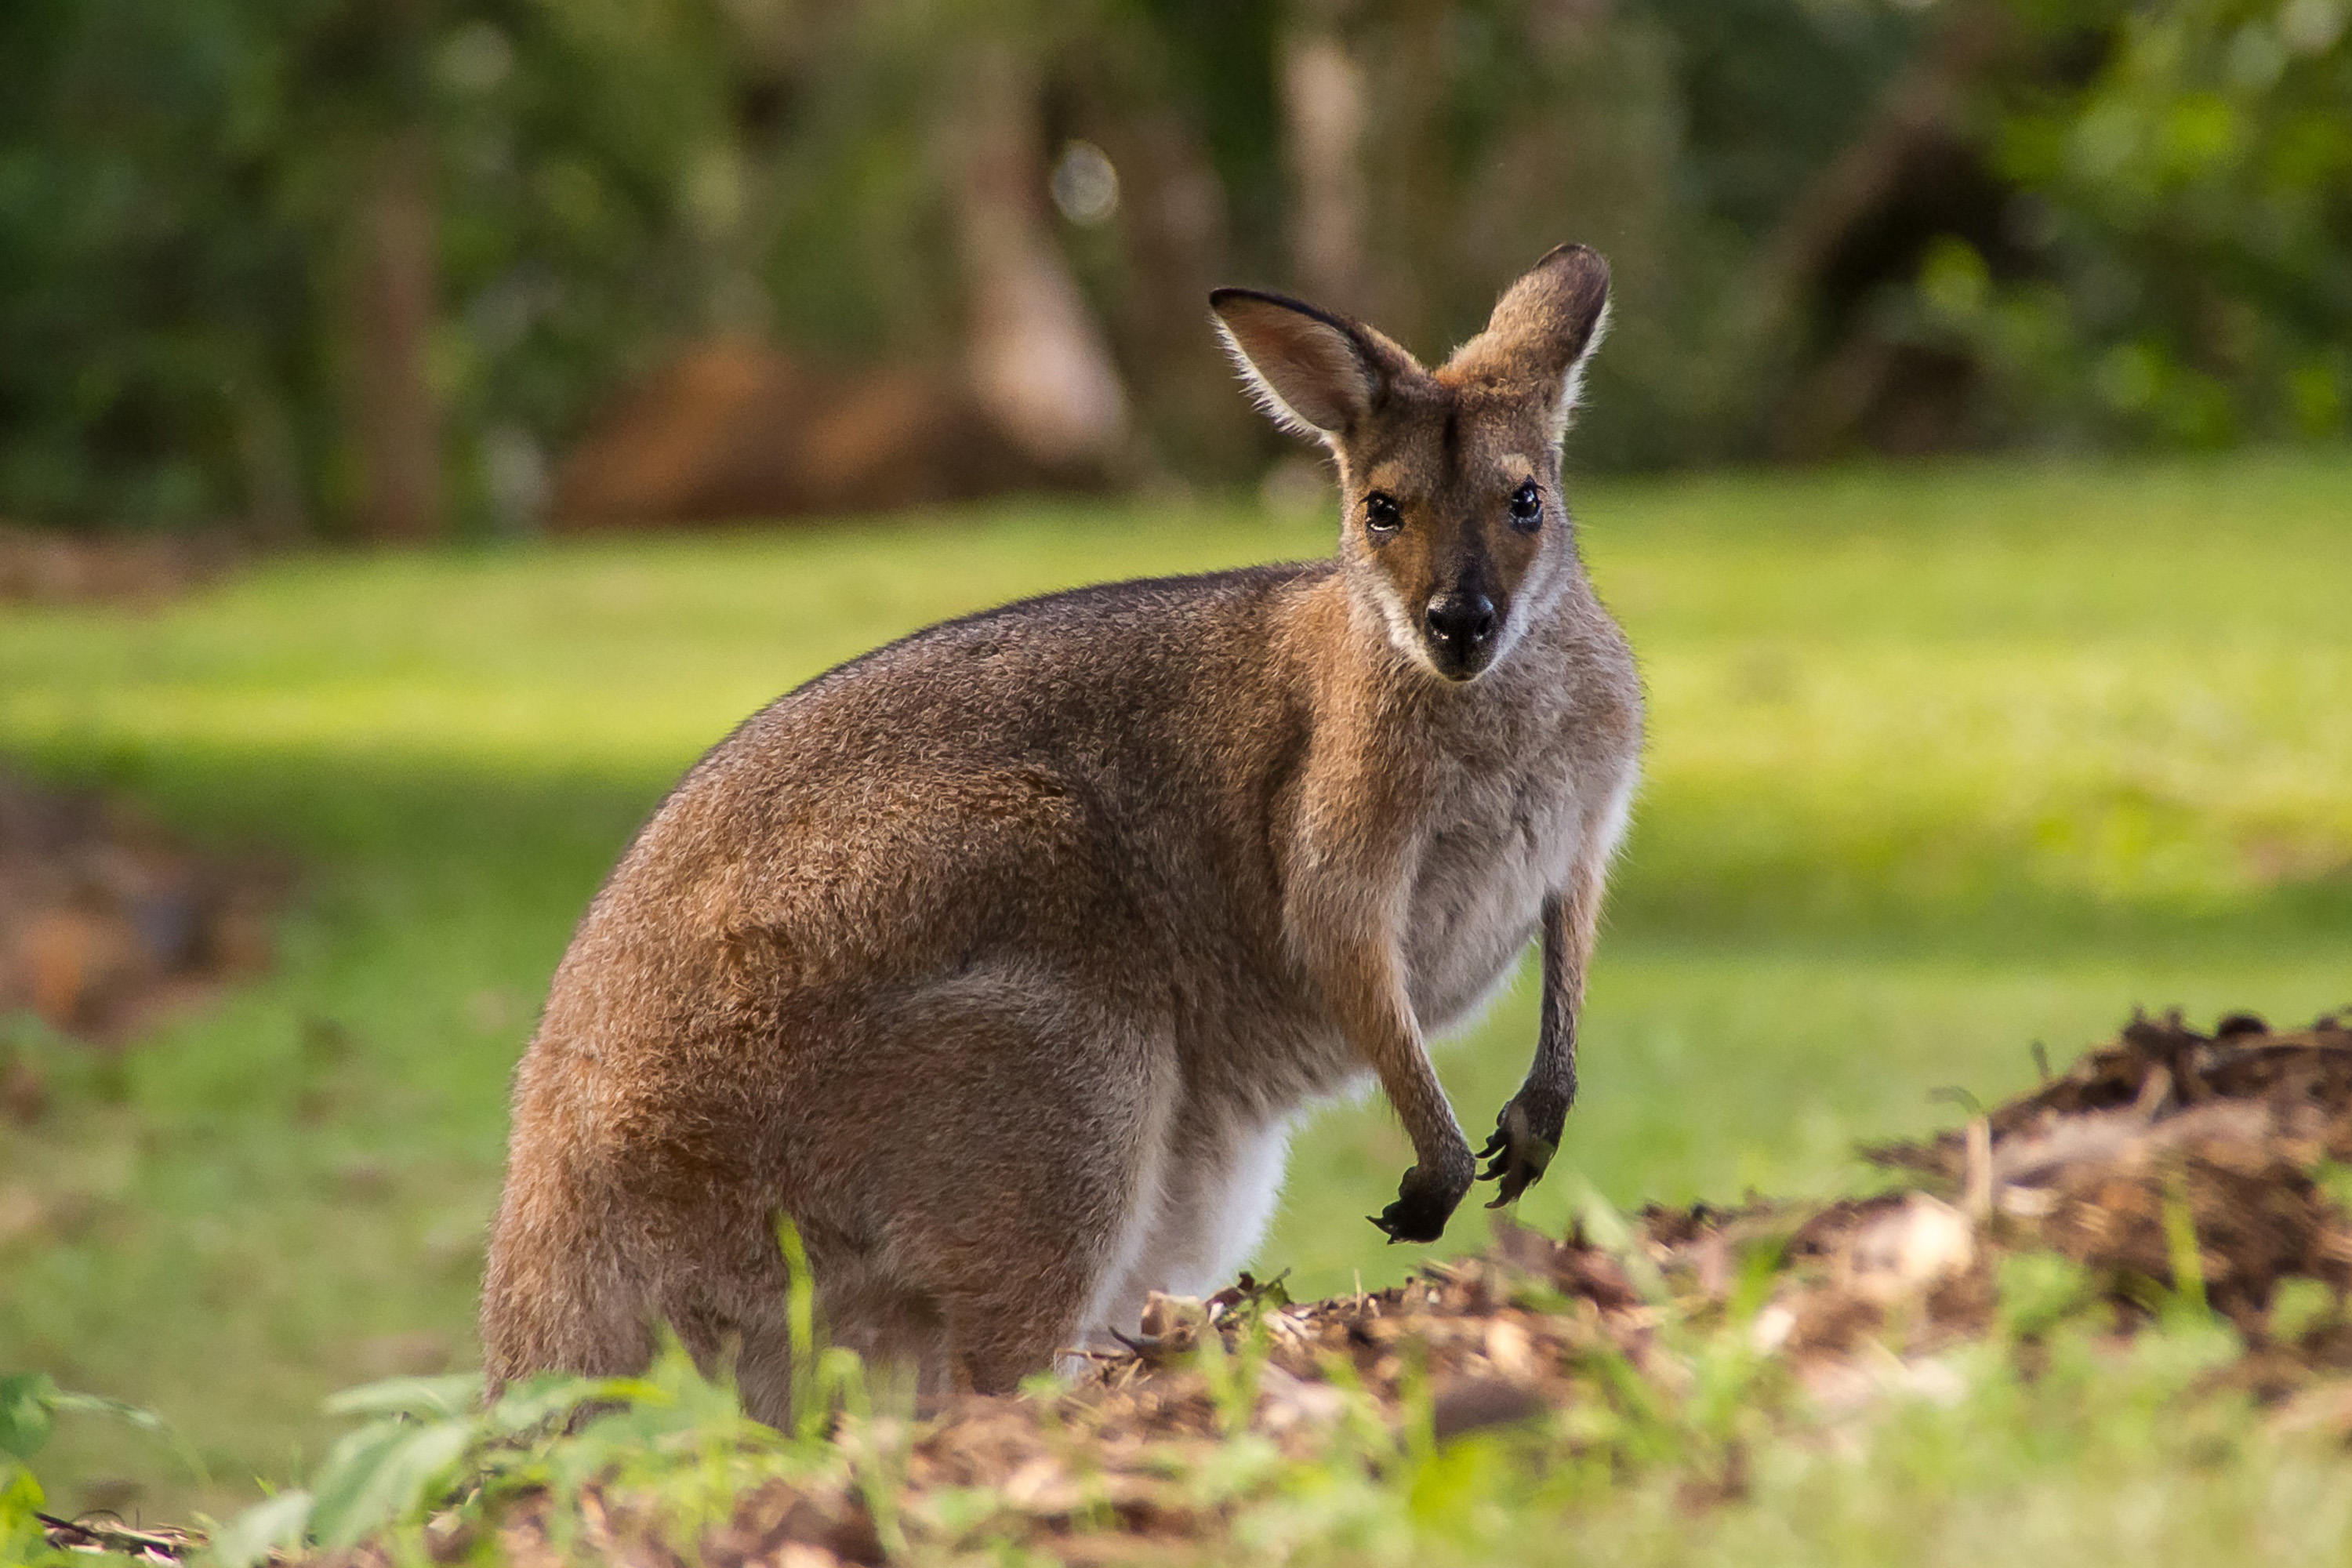 Download Wallaby in Australia.